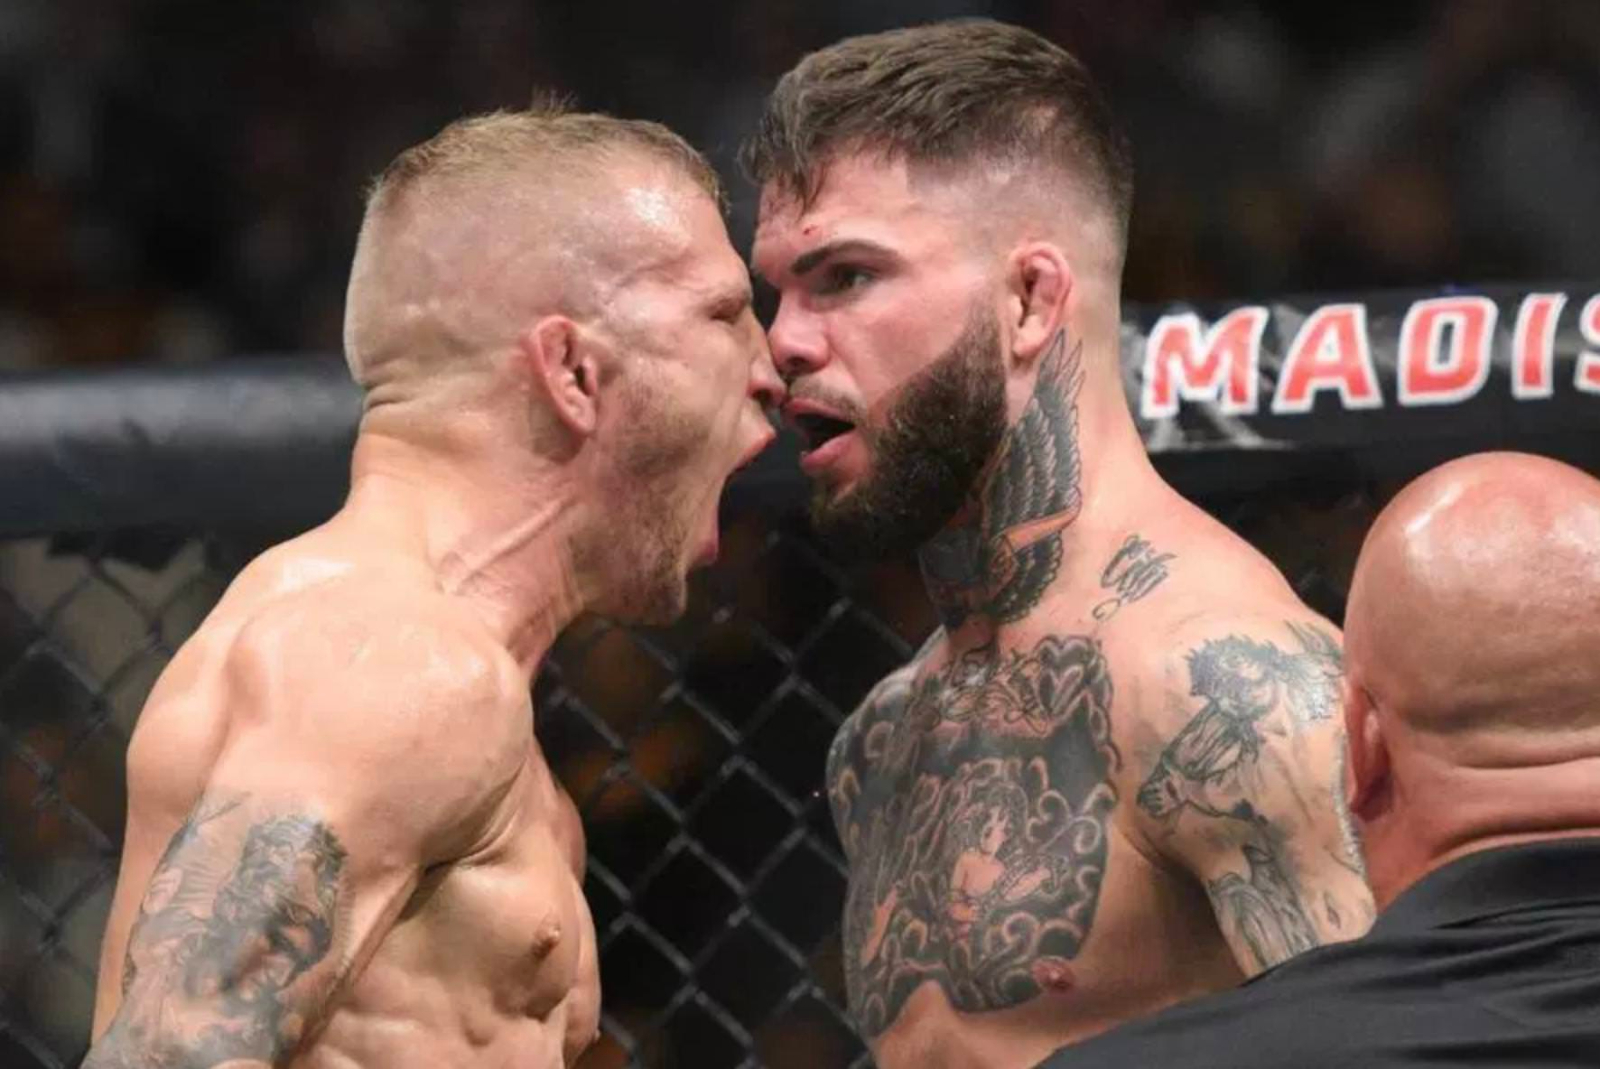 UFC: TJ Dillashaw explains why he refused to fight Cody Garbrandt at UFC 222 - Dillashaw